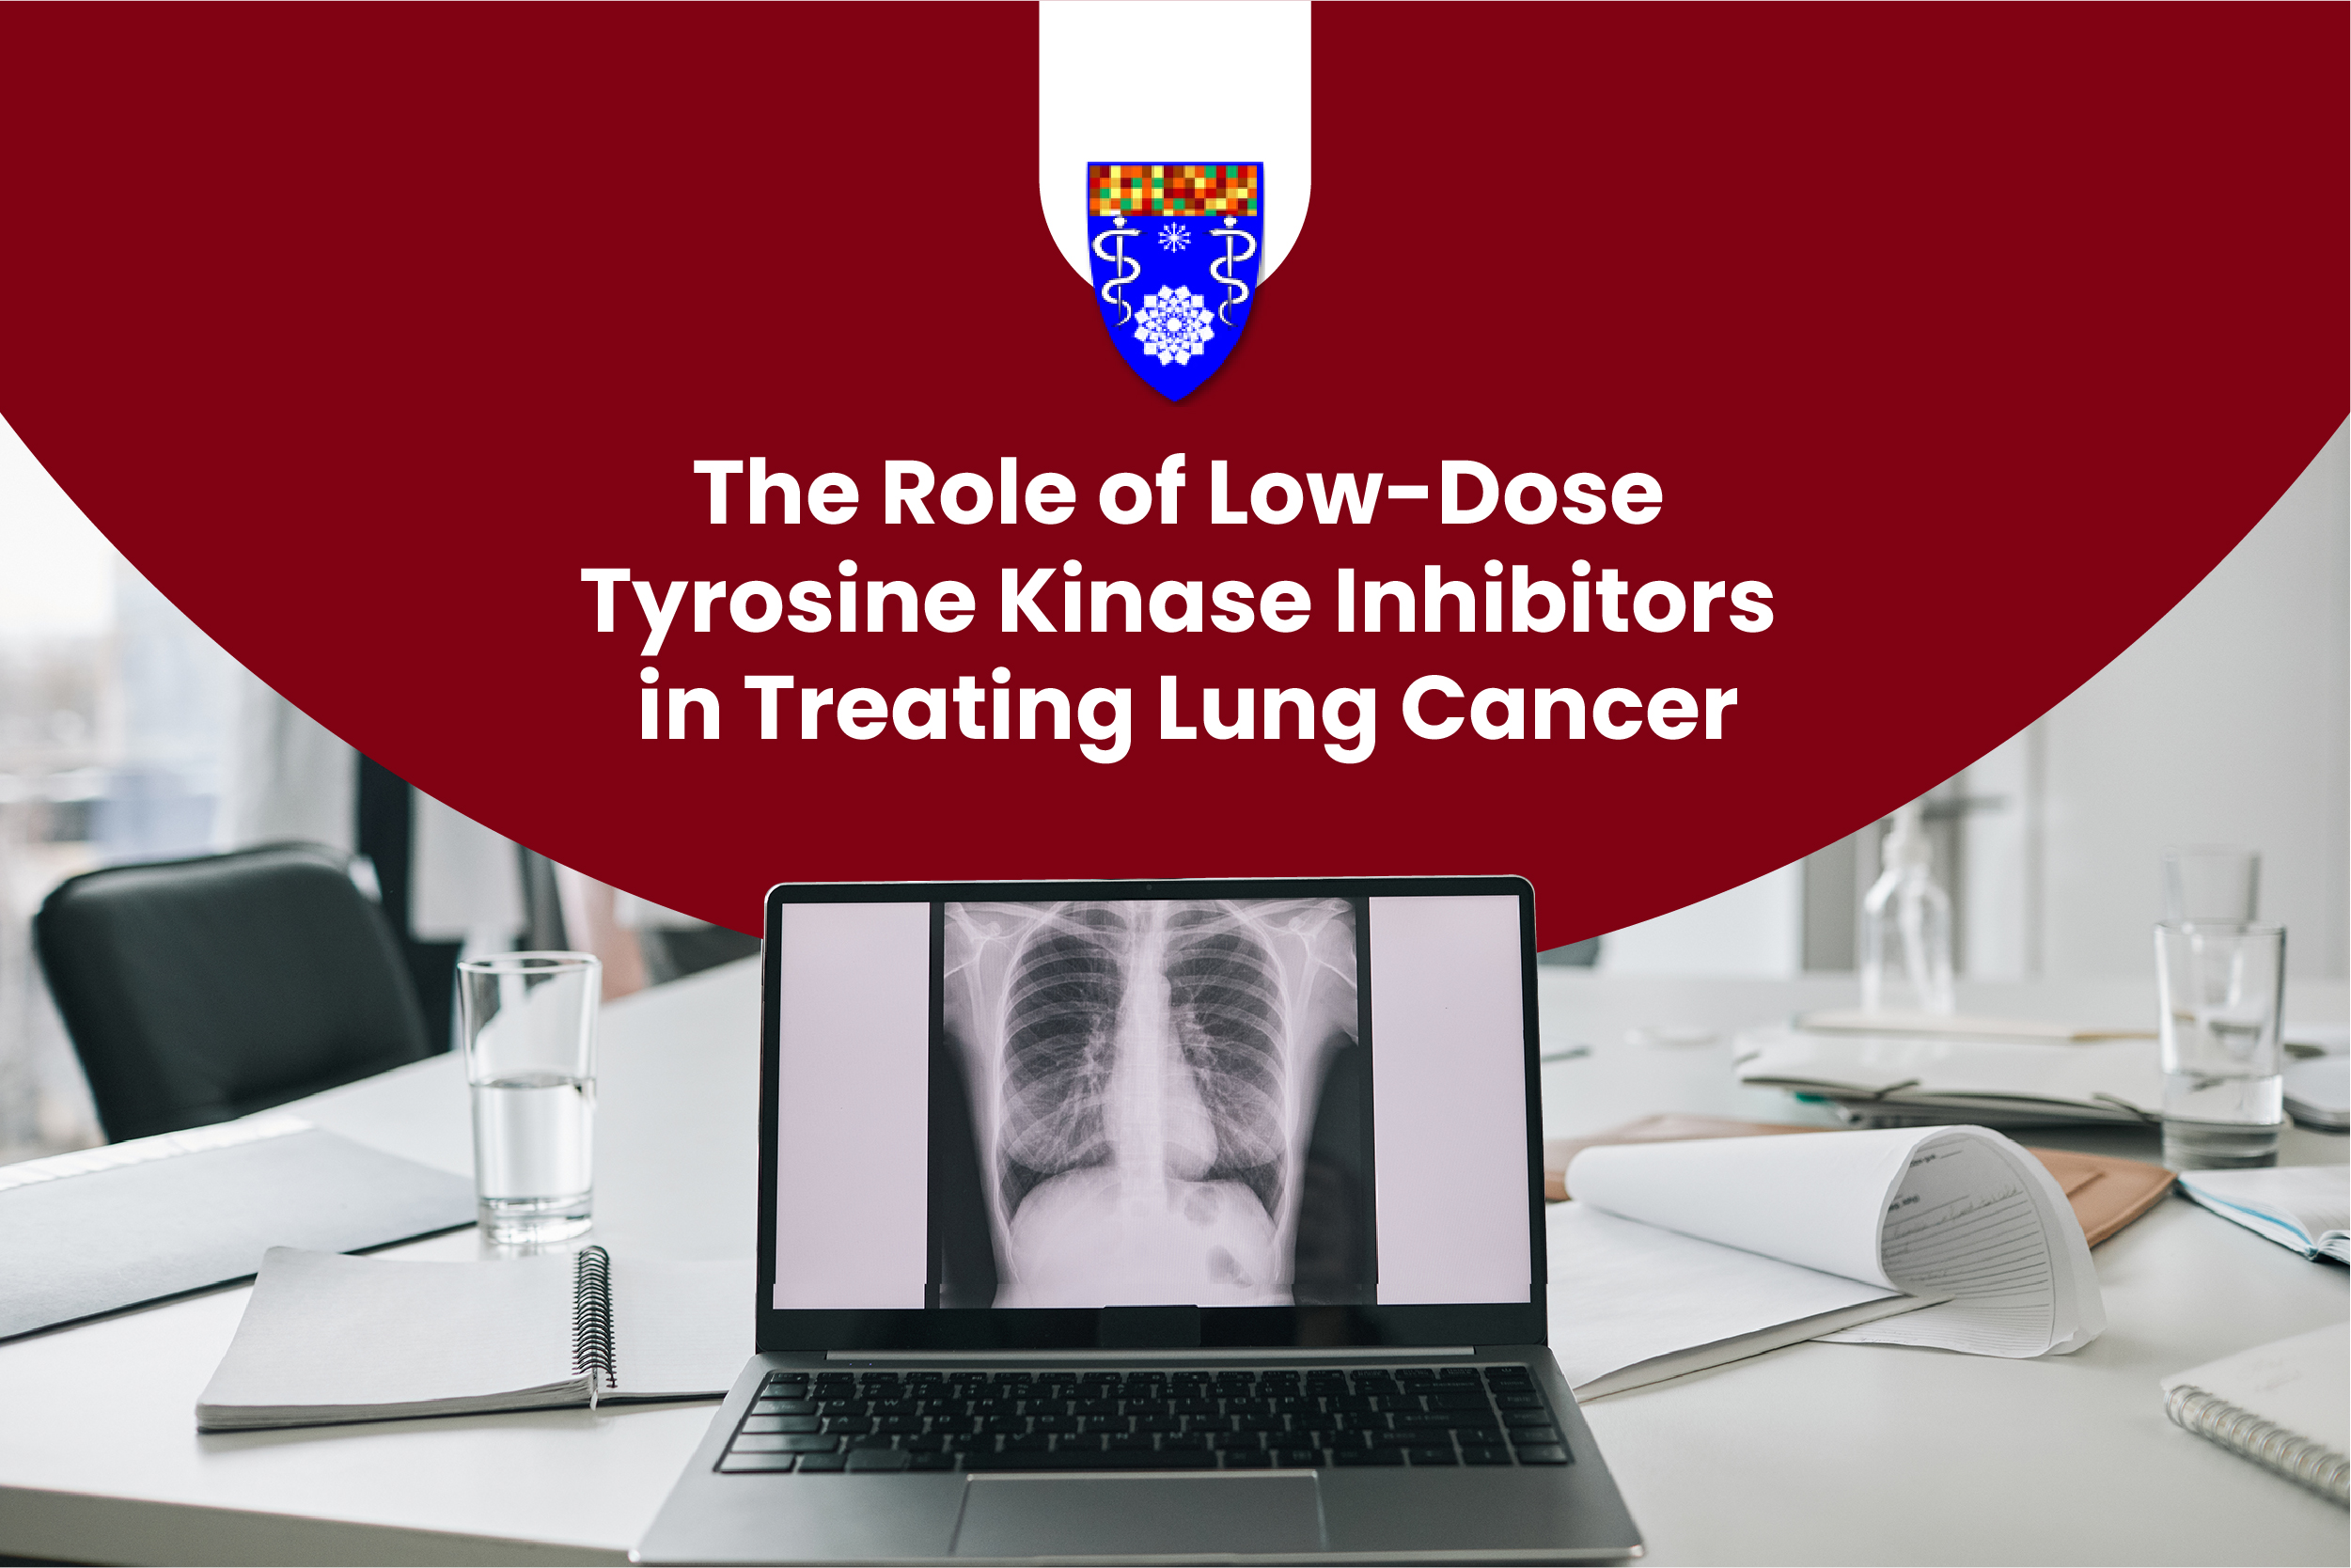 You are currently viewing The Role of Low-Dose Tyrosine Kinase Inhibitors in Treating Lung Cancer